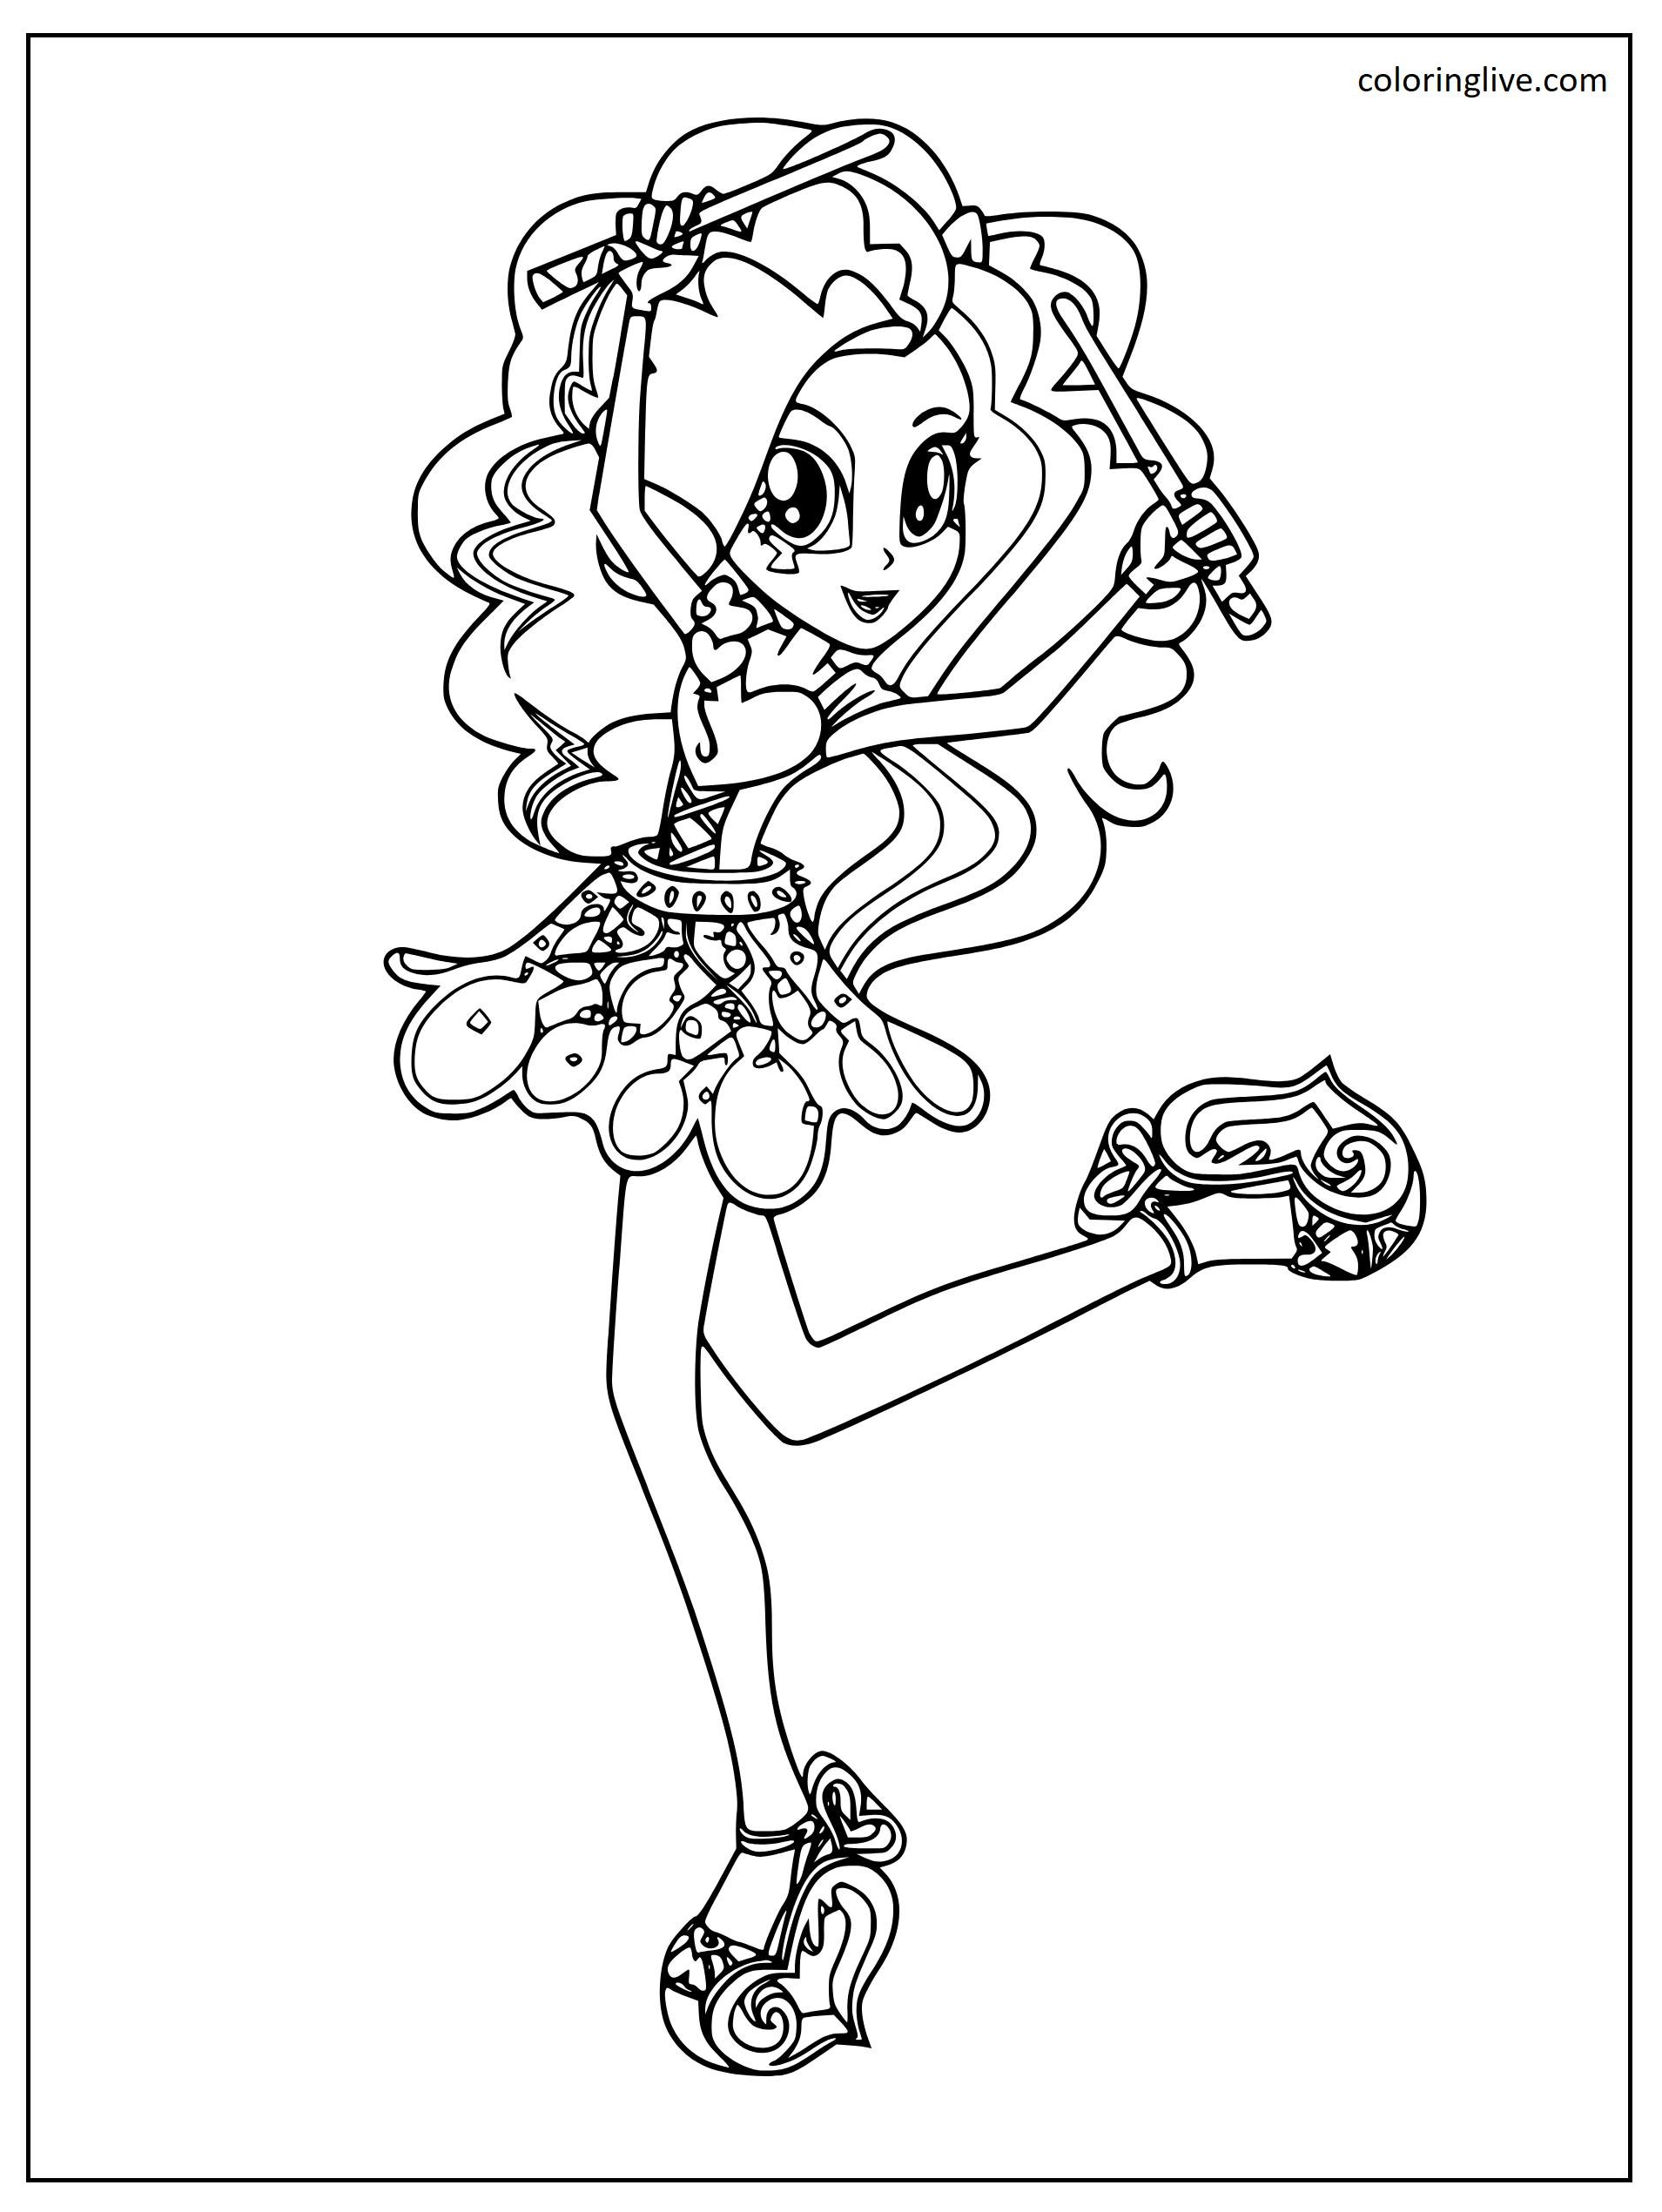 Printable Pinkie Pie from Equestria Girls MLP Coloring Page for kids.